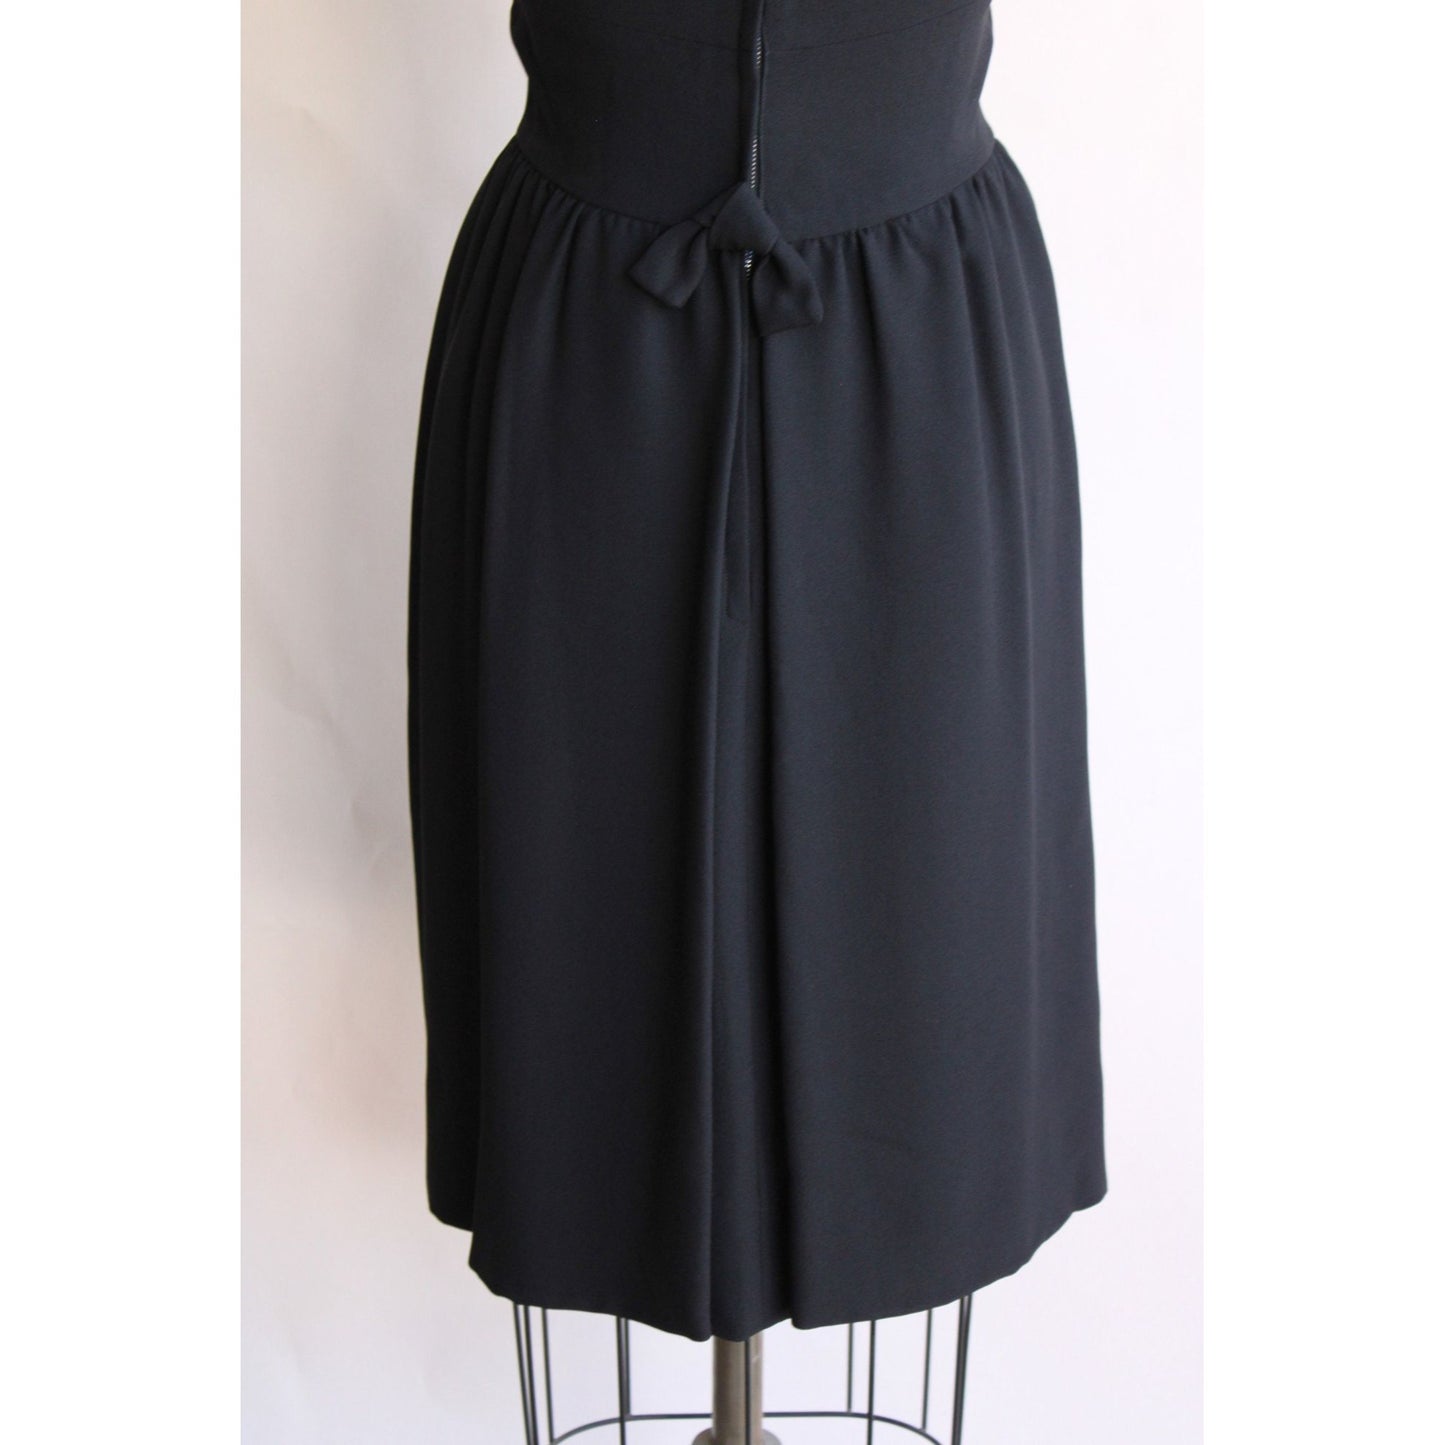 Vintage 1960s Dress With Bows by Jeunesse